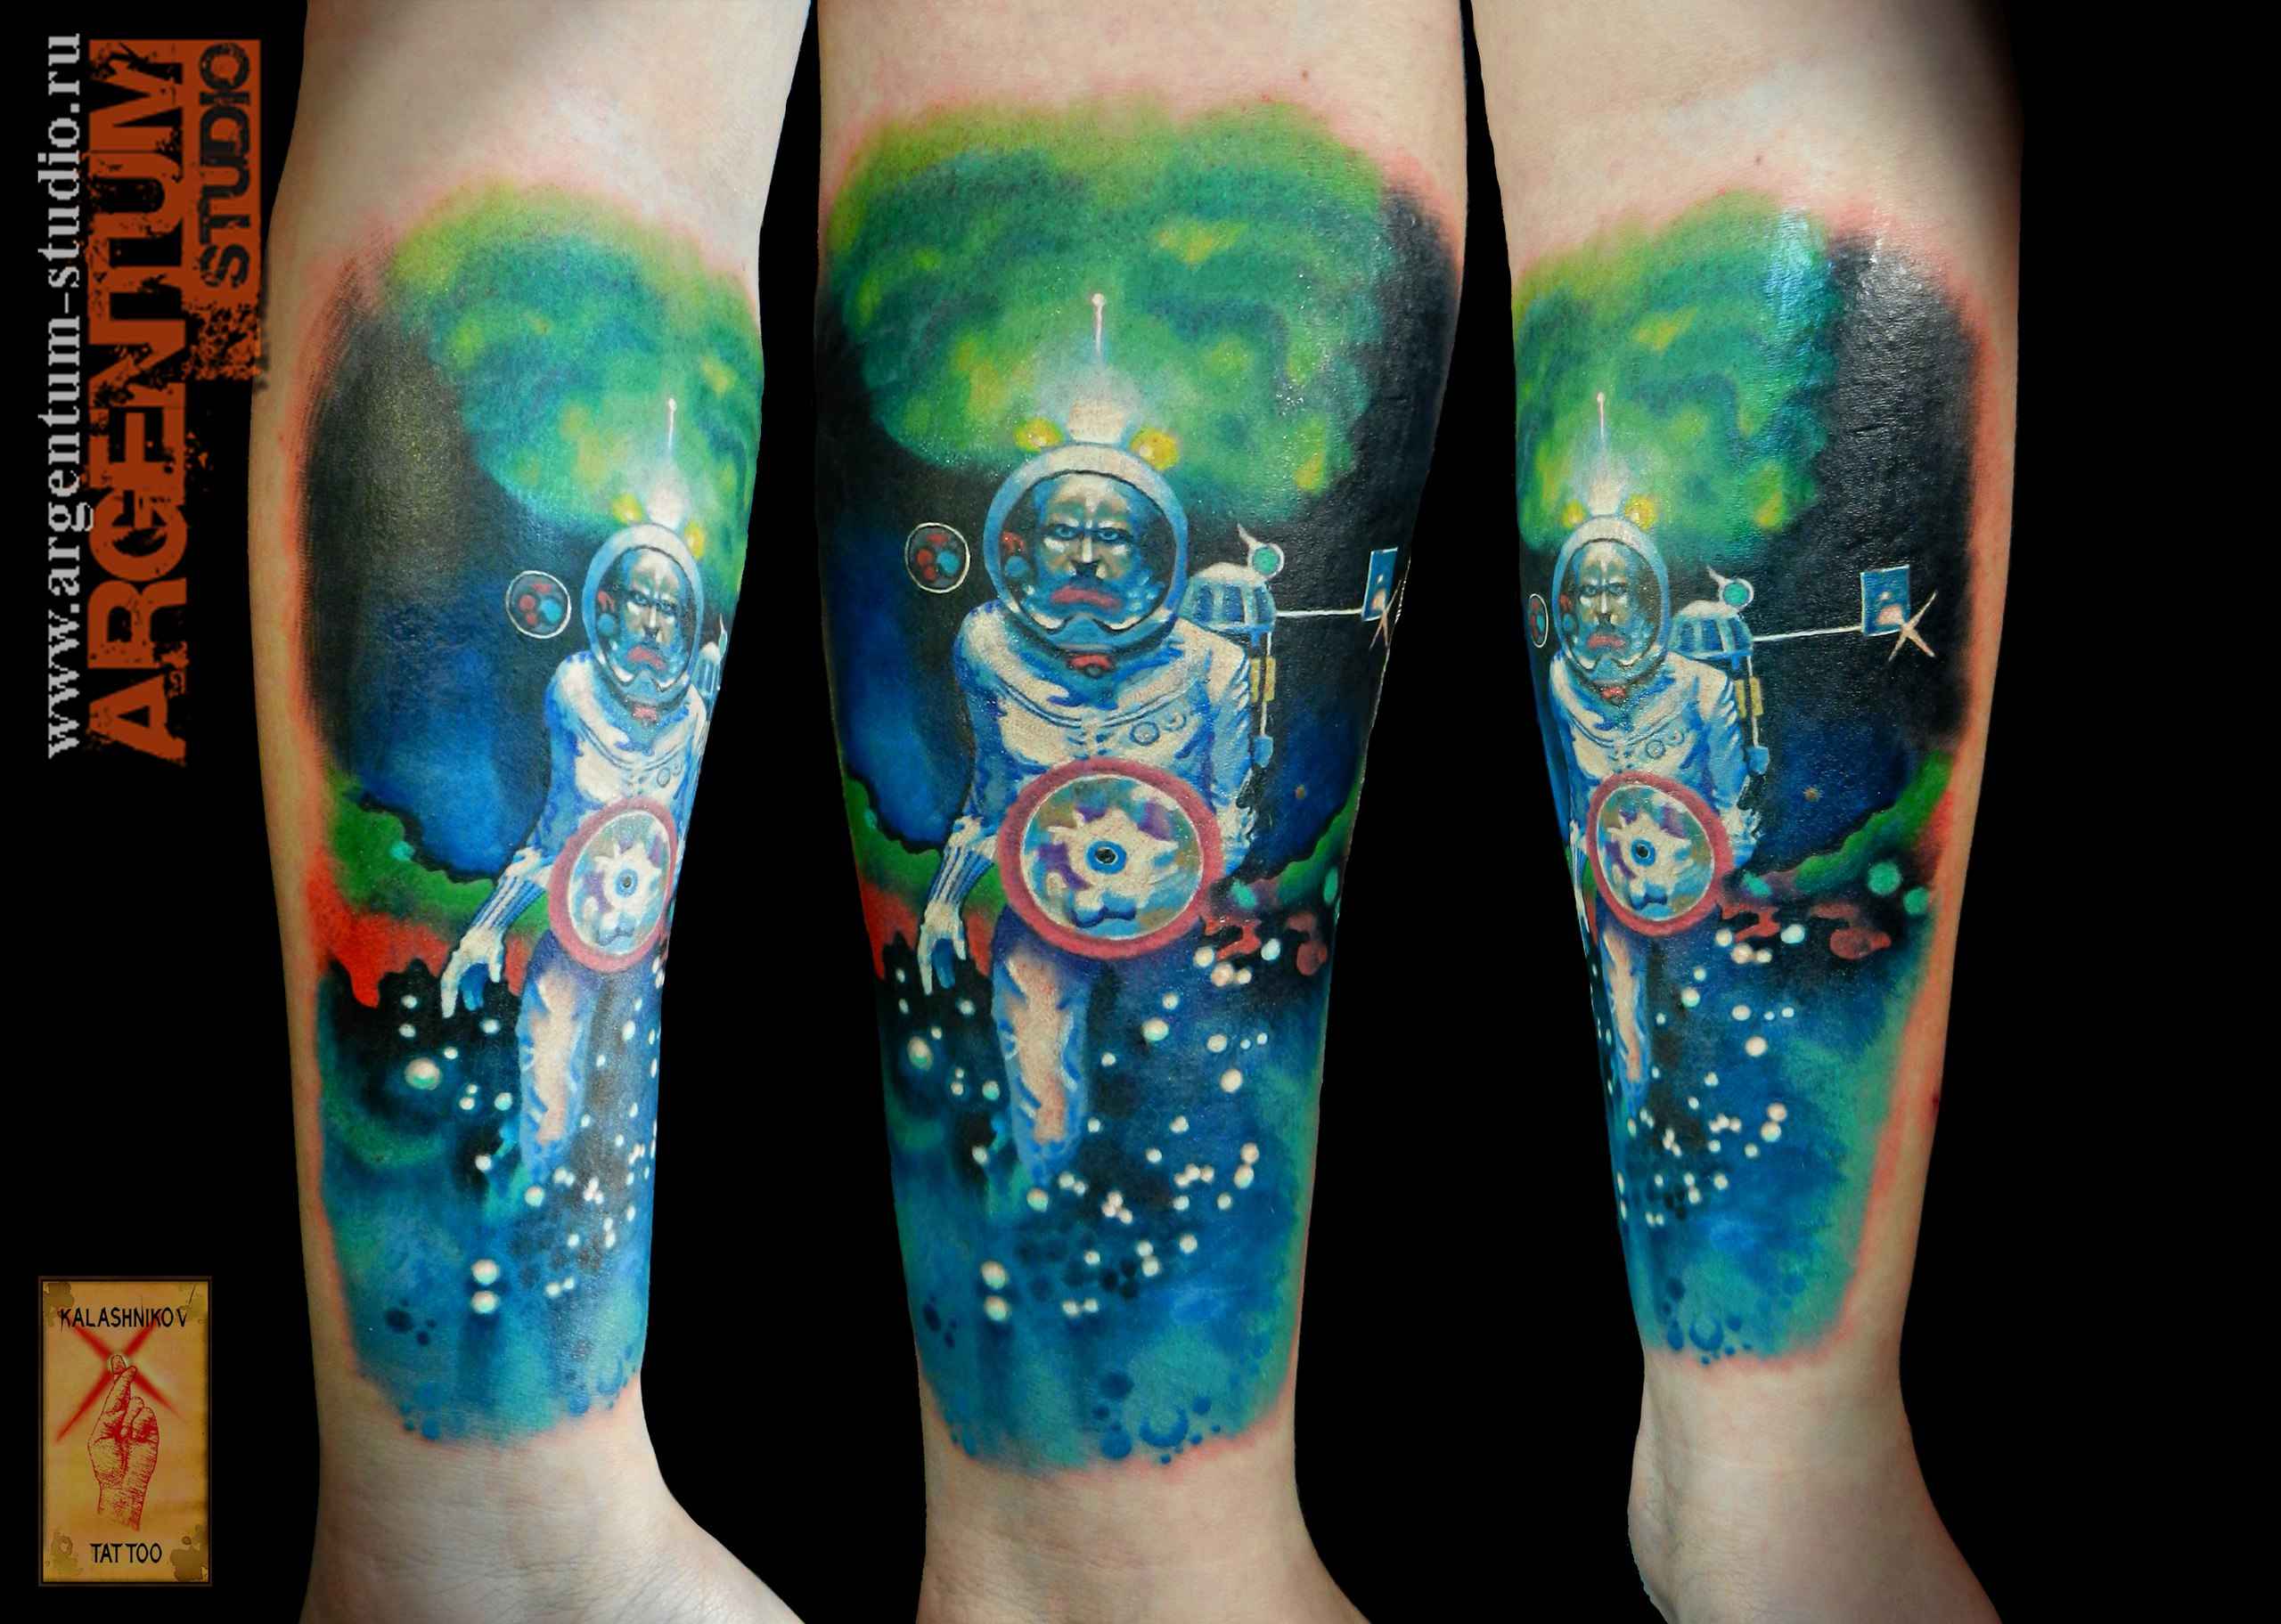 Top Shelf Tattoo  Retro scifi girl by jefvelascoart For appointments  please email heyimjefgmailcom or stop by the shop  21302 42nd Ave  Bayside NY 11361 7184232637  topshelftattoo topshelftattoonyc tattoo  tattoos 